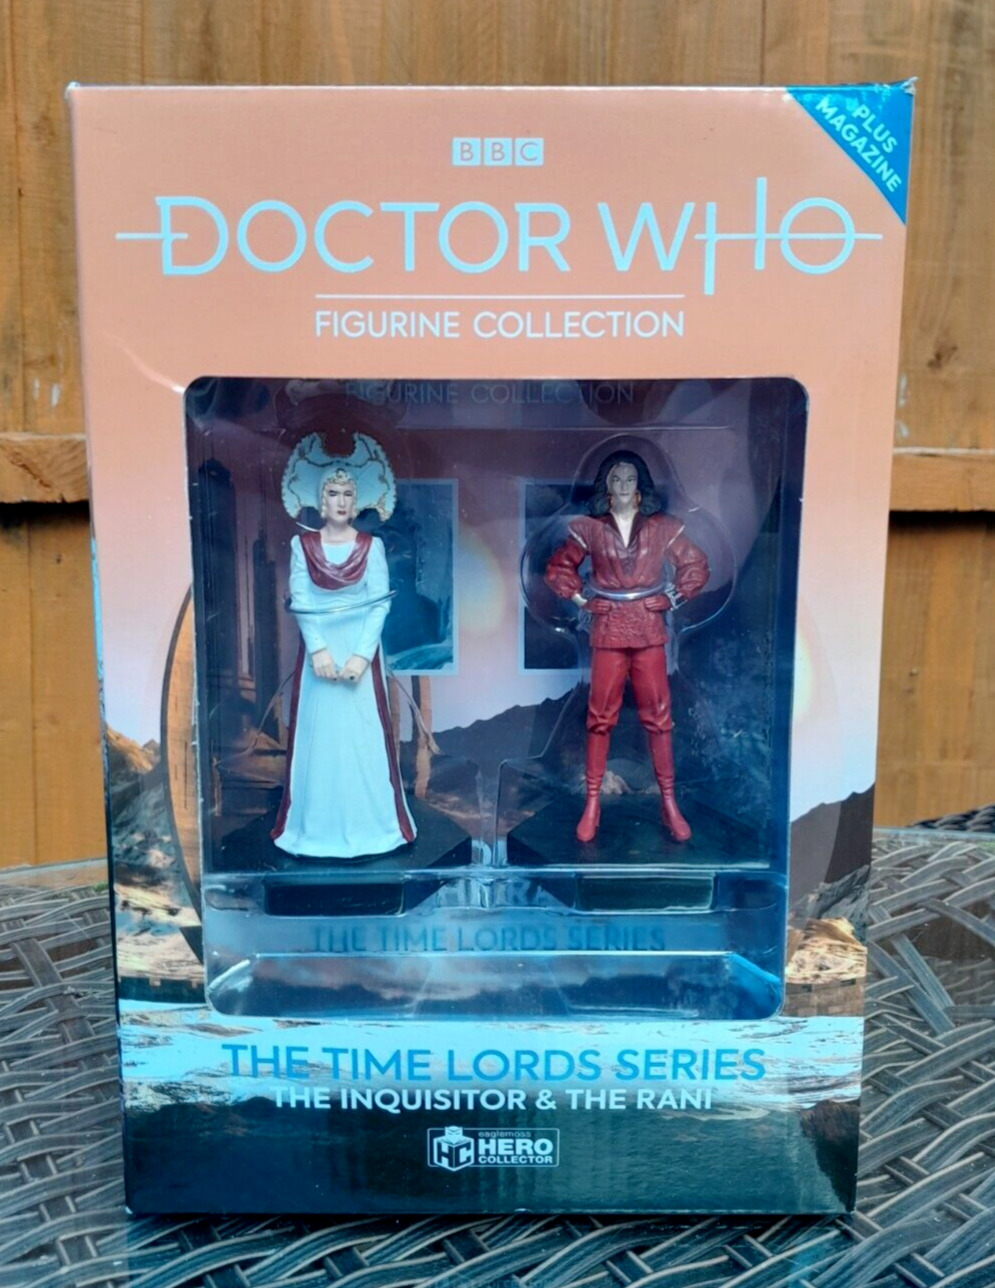 EAGLEMOSS DOCTOR WHO FIGURINE COLLECTION TIMELORD SERIES THE INQUISITOR & RANI